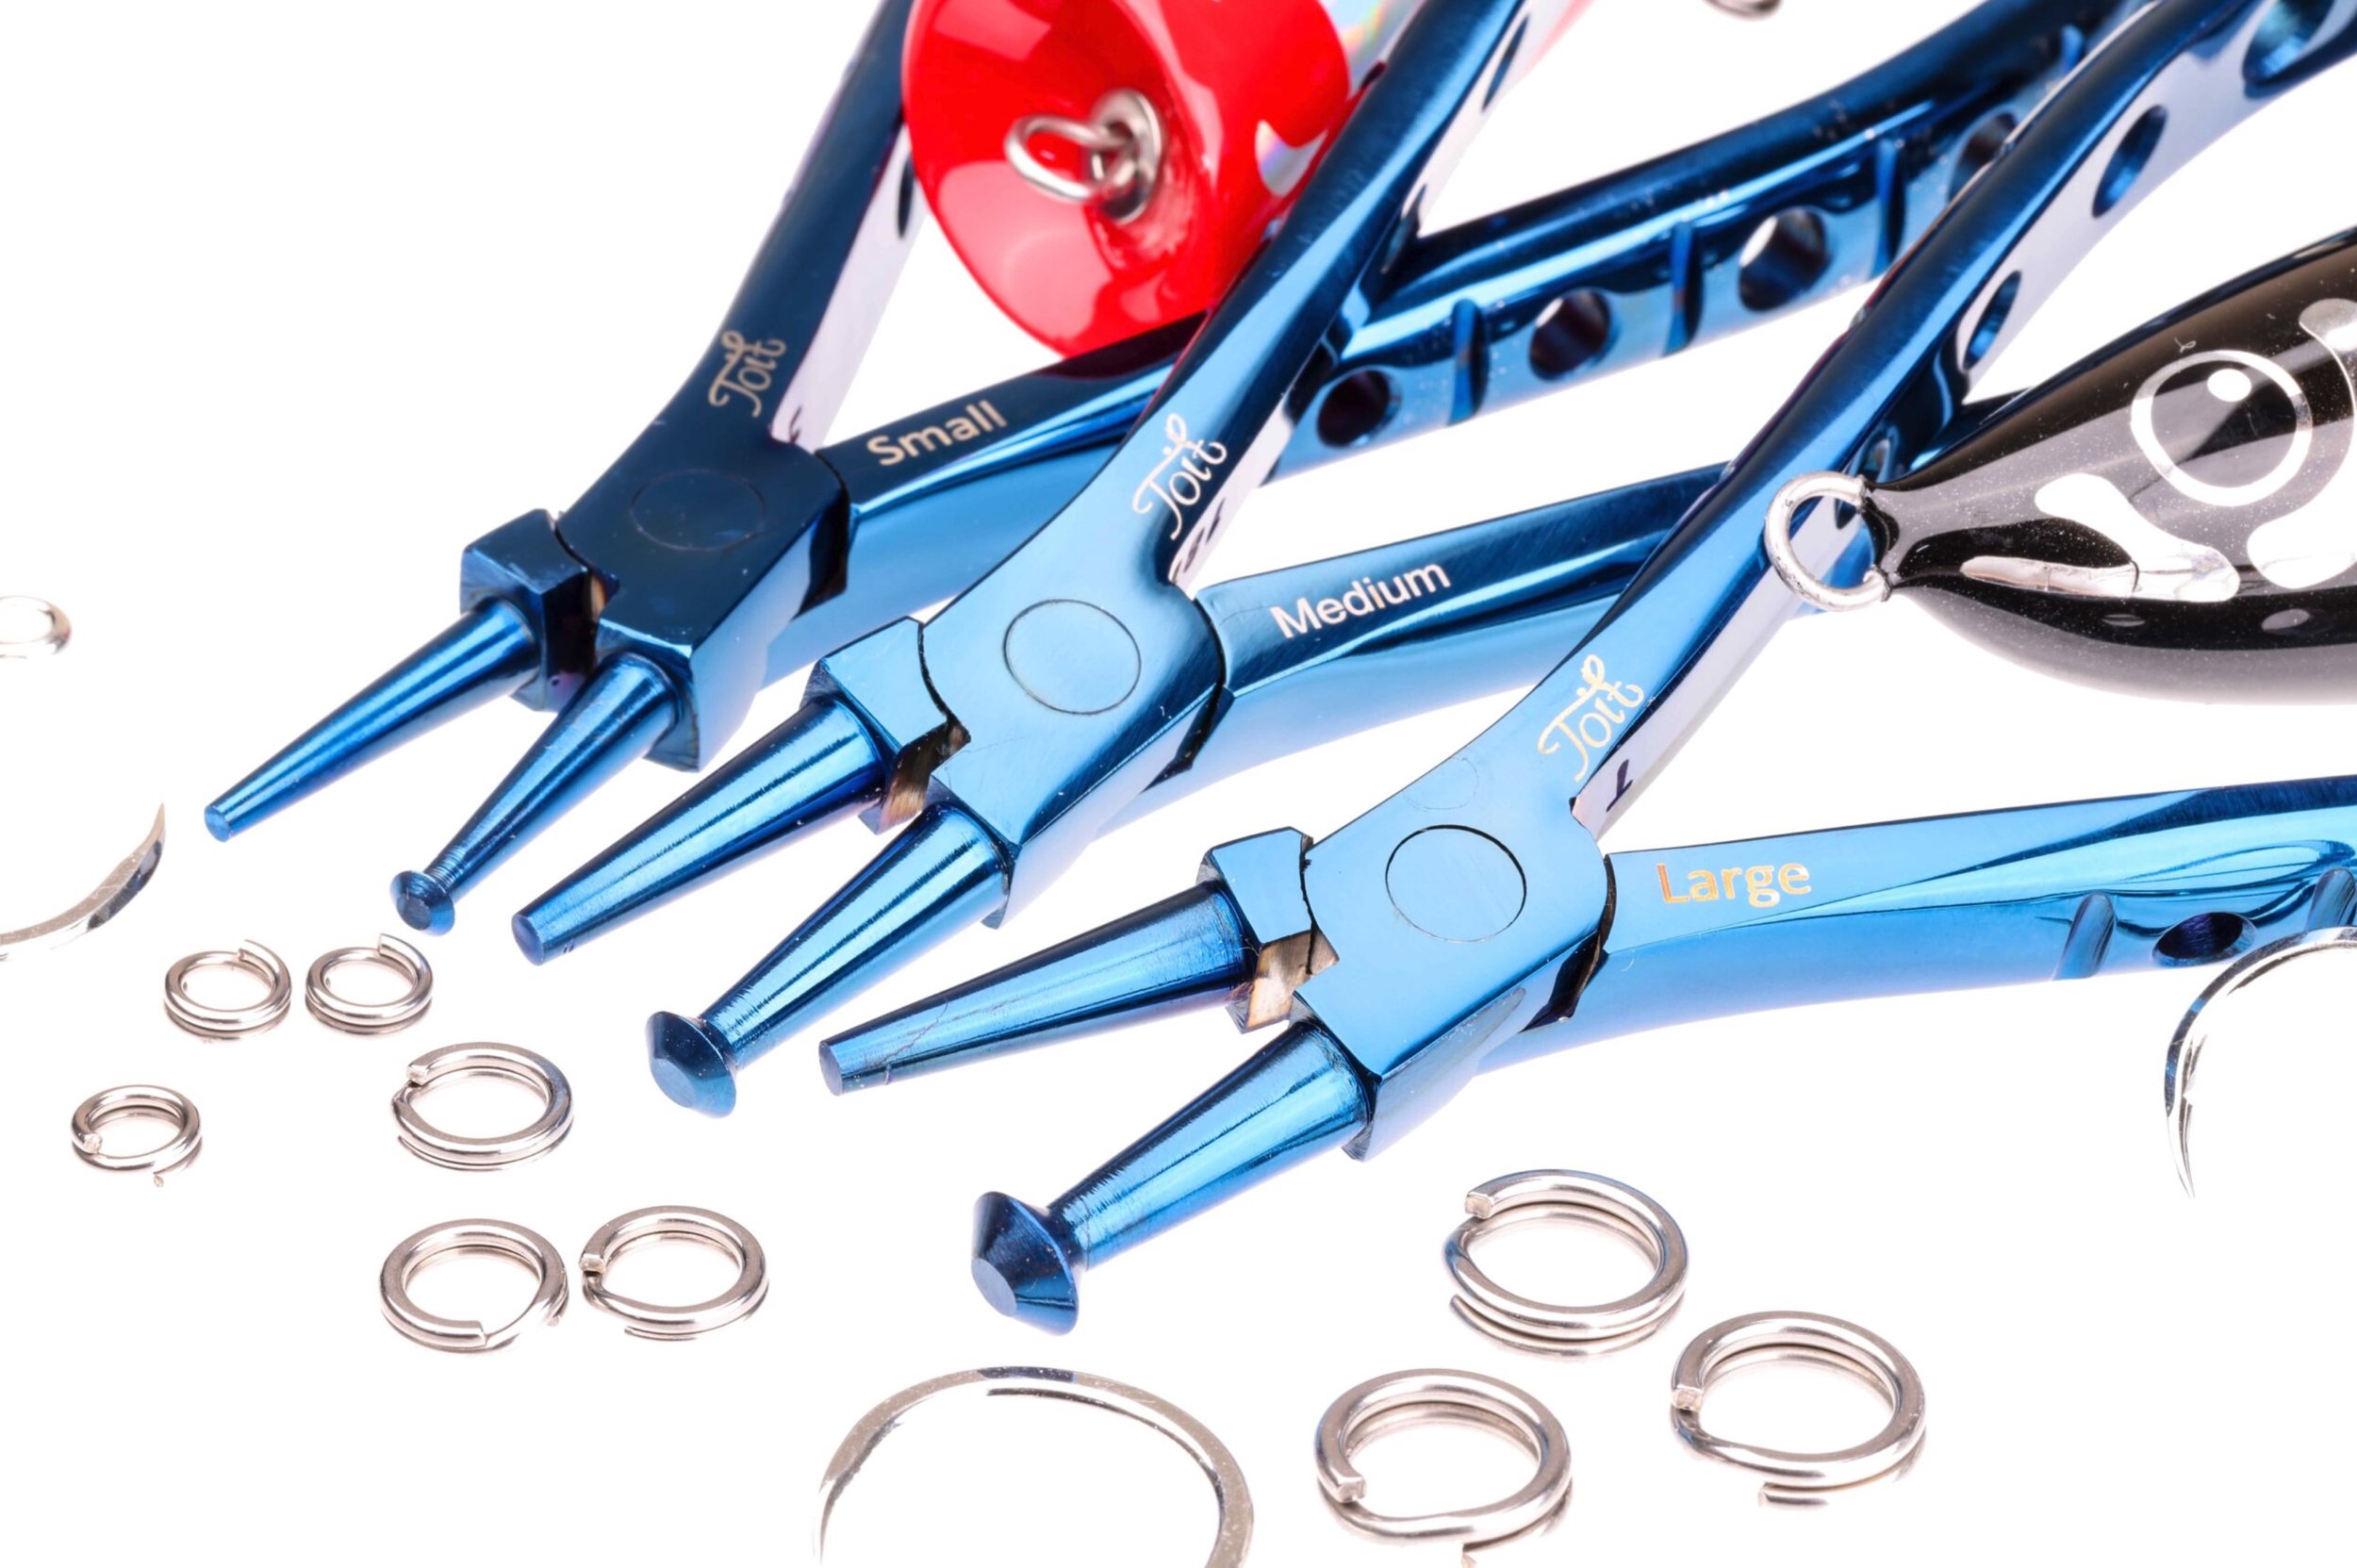 Toit Fishing Split Ring Pliers review (ingenious) - around £28 here in the  UK — Henry Gilbey